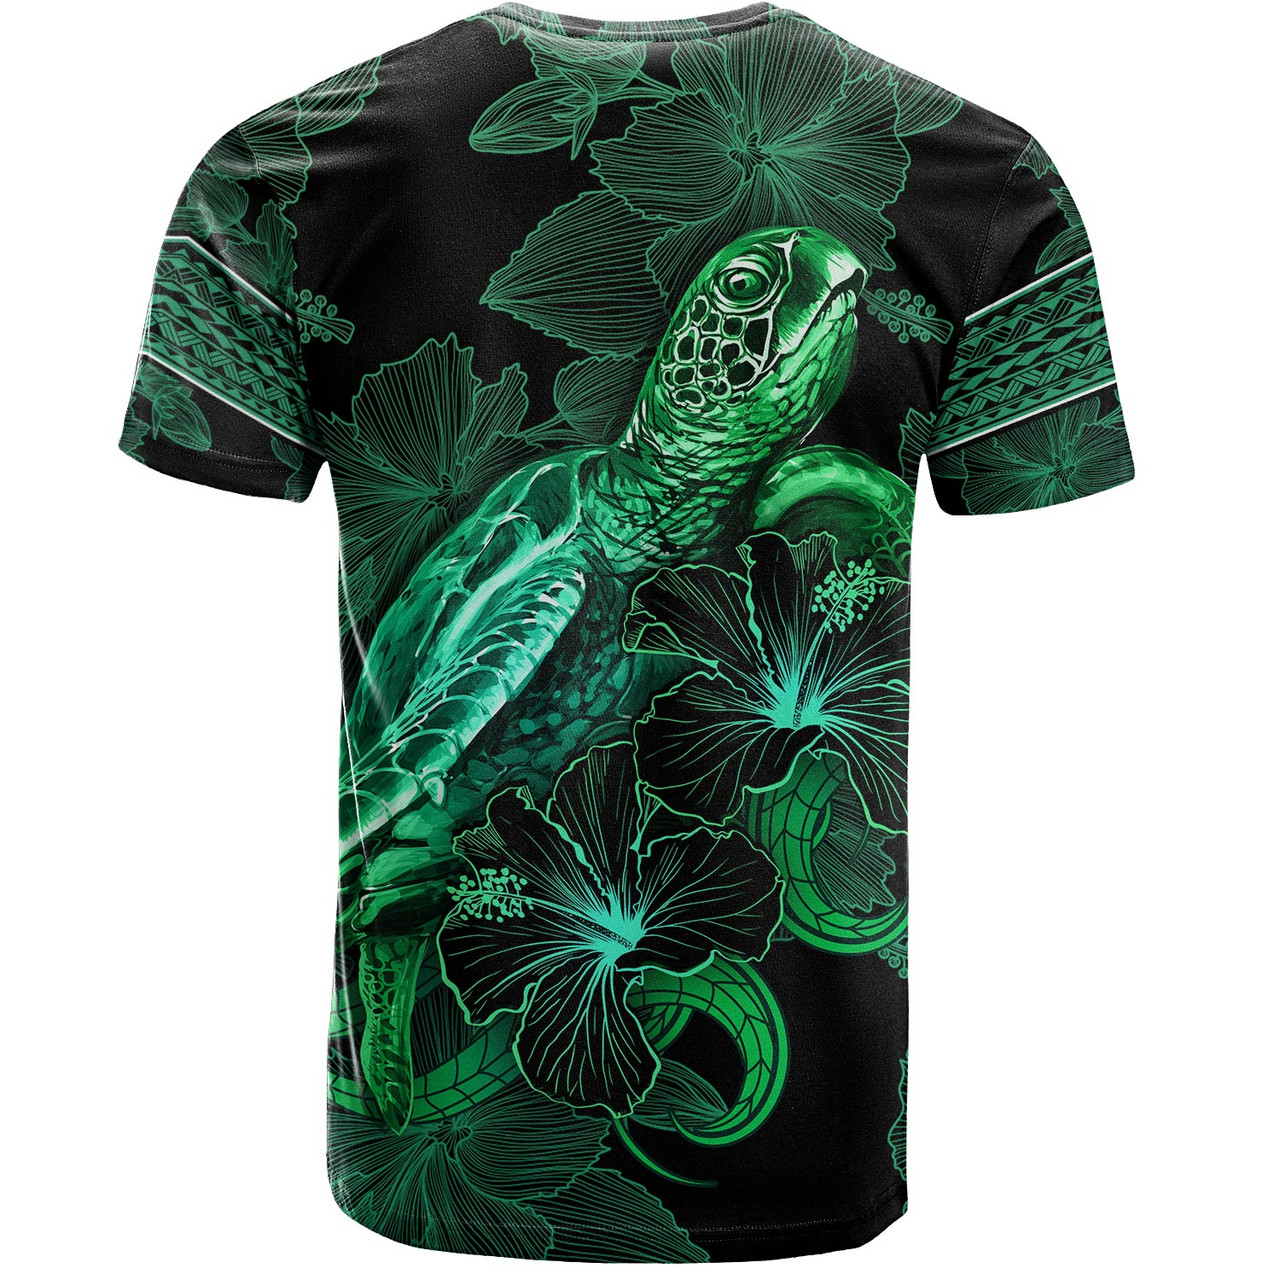 Pohnpei State T-Shirt  Sea Turtle With Blooming Hibiscus Flowers Tribal Green